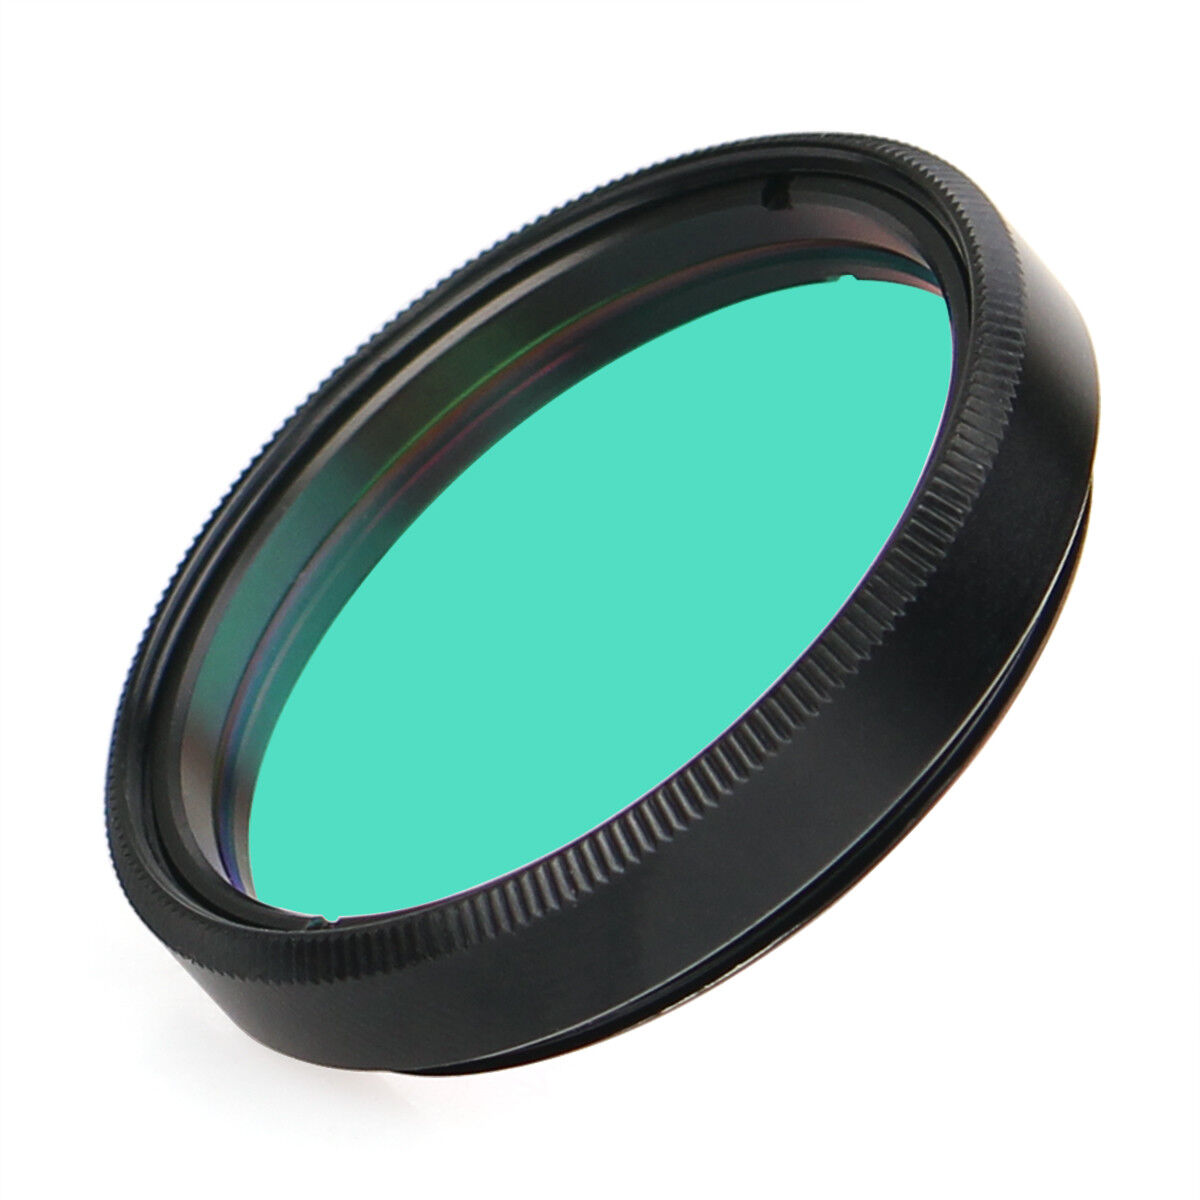 SVBONY 1.25inch CLS Deep Sky Filters For 1.25